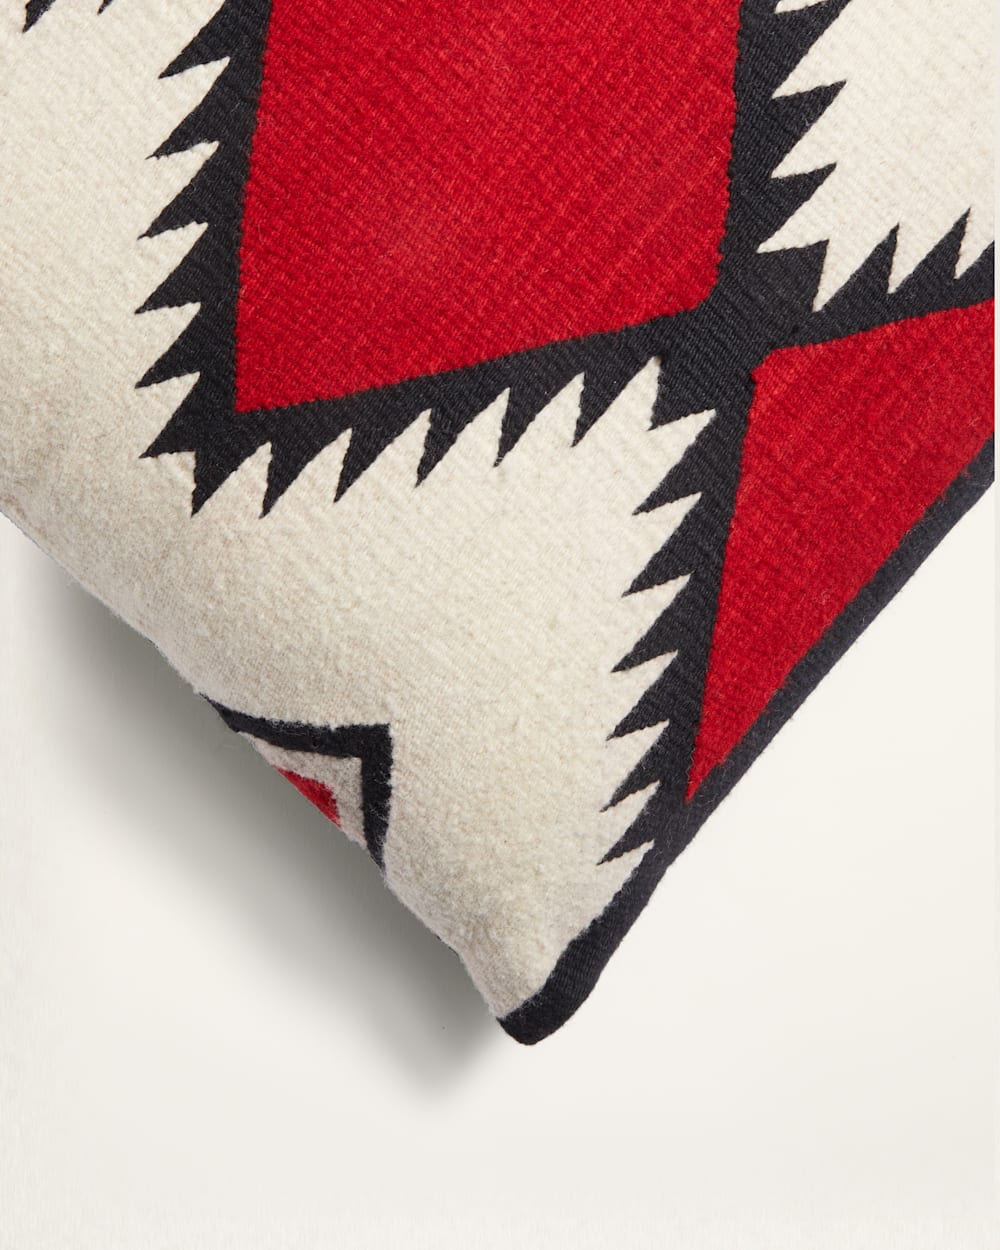 ALTERNATE VIEW OF ZAPOTEC DIAMOND SQUARE PILLOW IN RED/BLACK image number 2